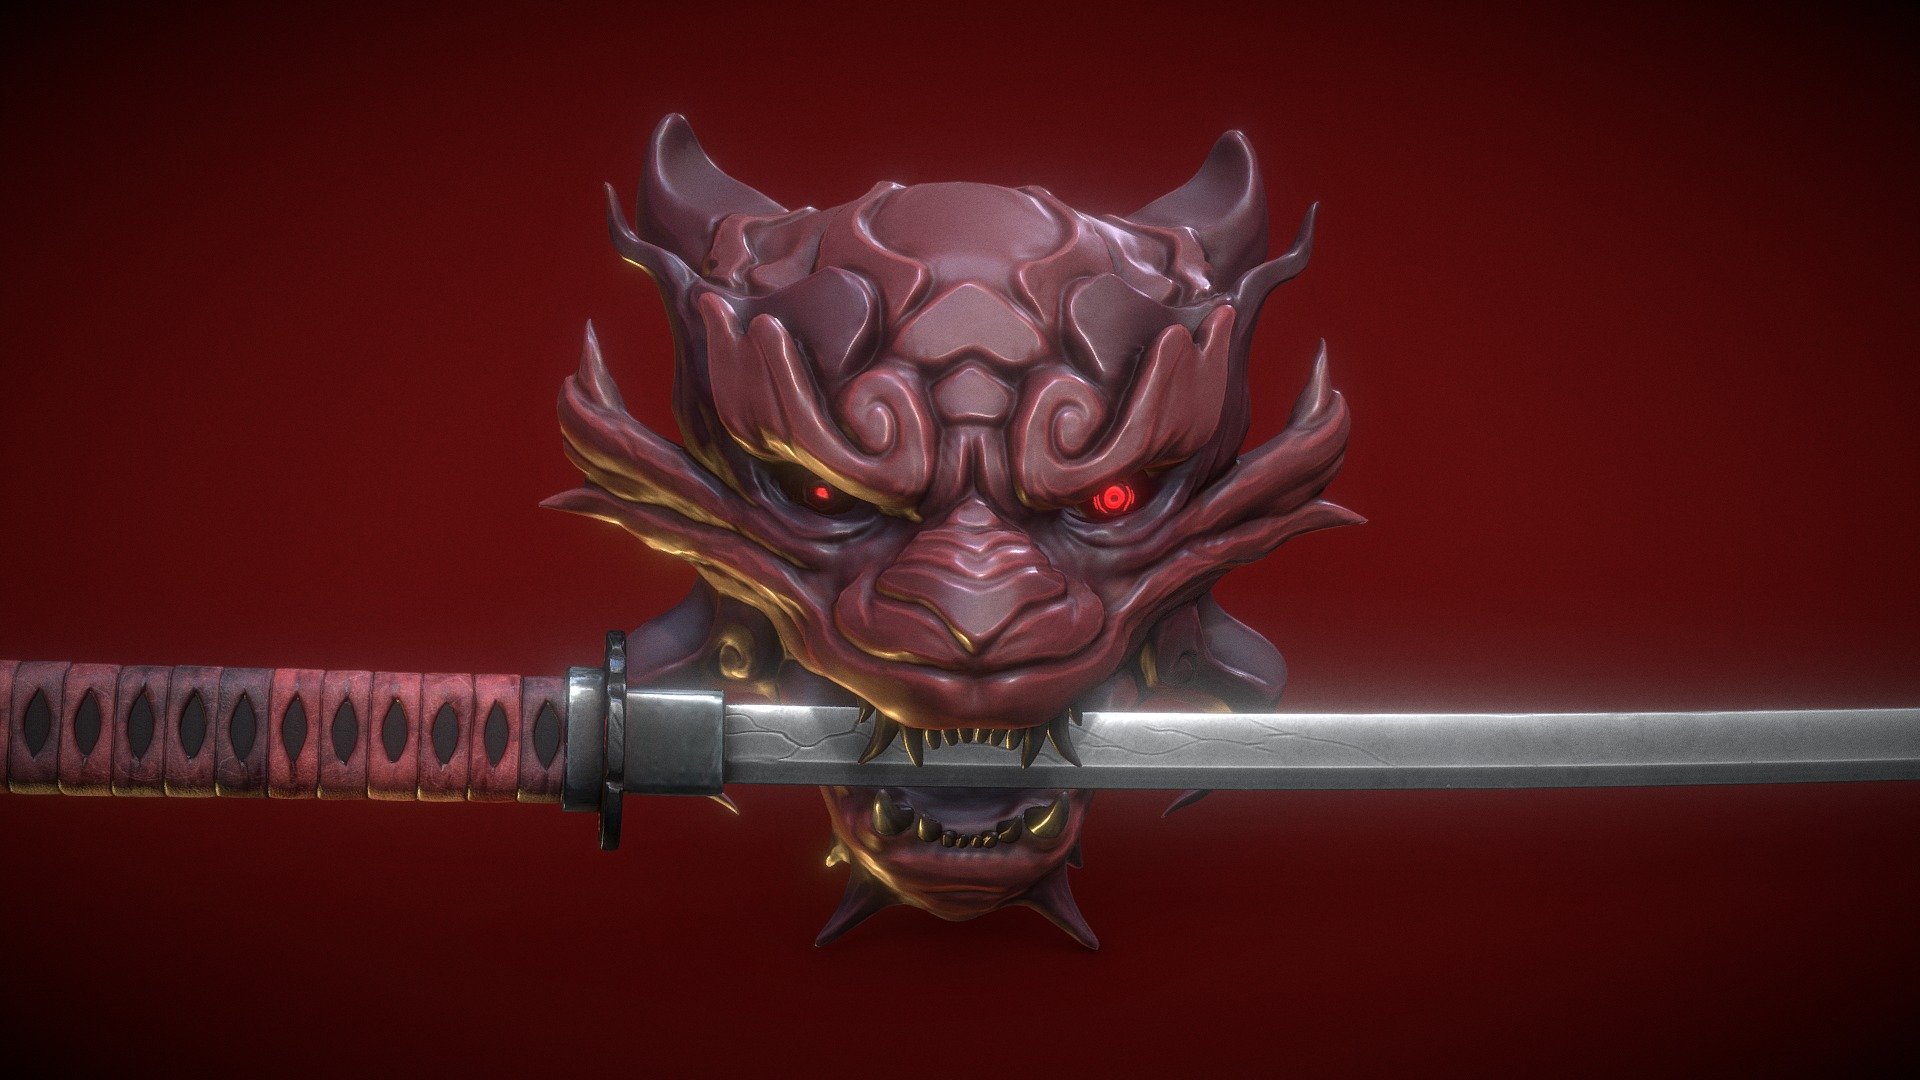 I've been working on props for a fantasy Japanese type game environment and this oni mask and katana is a part of it. 
The project is called &lsquo;Oni's rest' , I'll upload the mini environment when I make it game ready(absolute torture). I learnt a lot so quality will be improving slowly but surely. 
there's some engravings on the katana, which are emissive.
the one on the butt cap(I searched up katana part names, dont @ me) translates to &ldquo;end